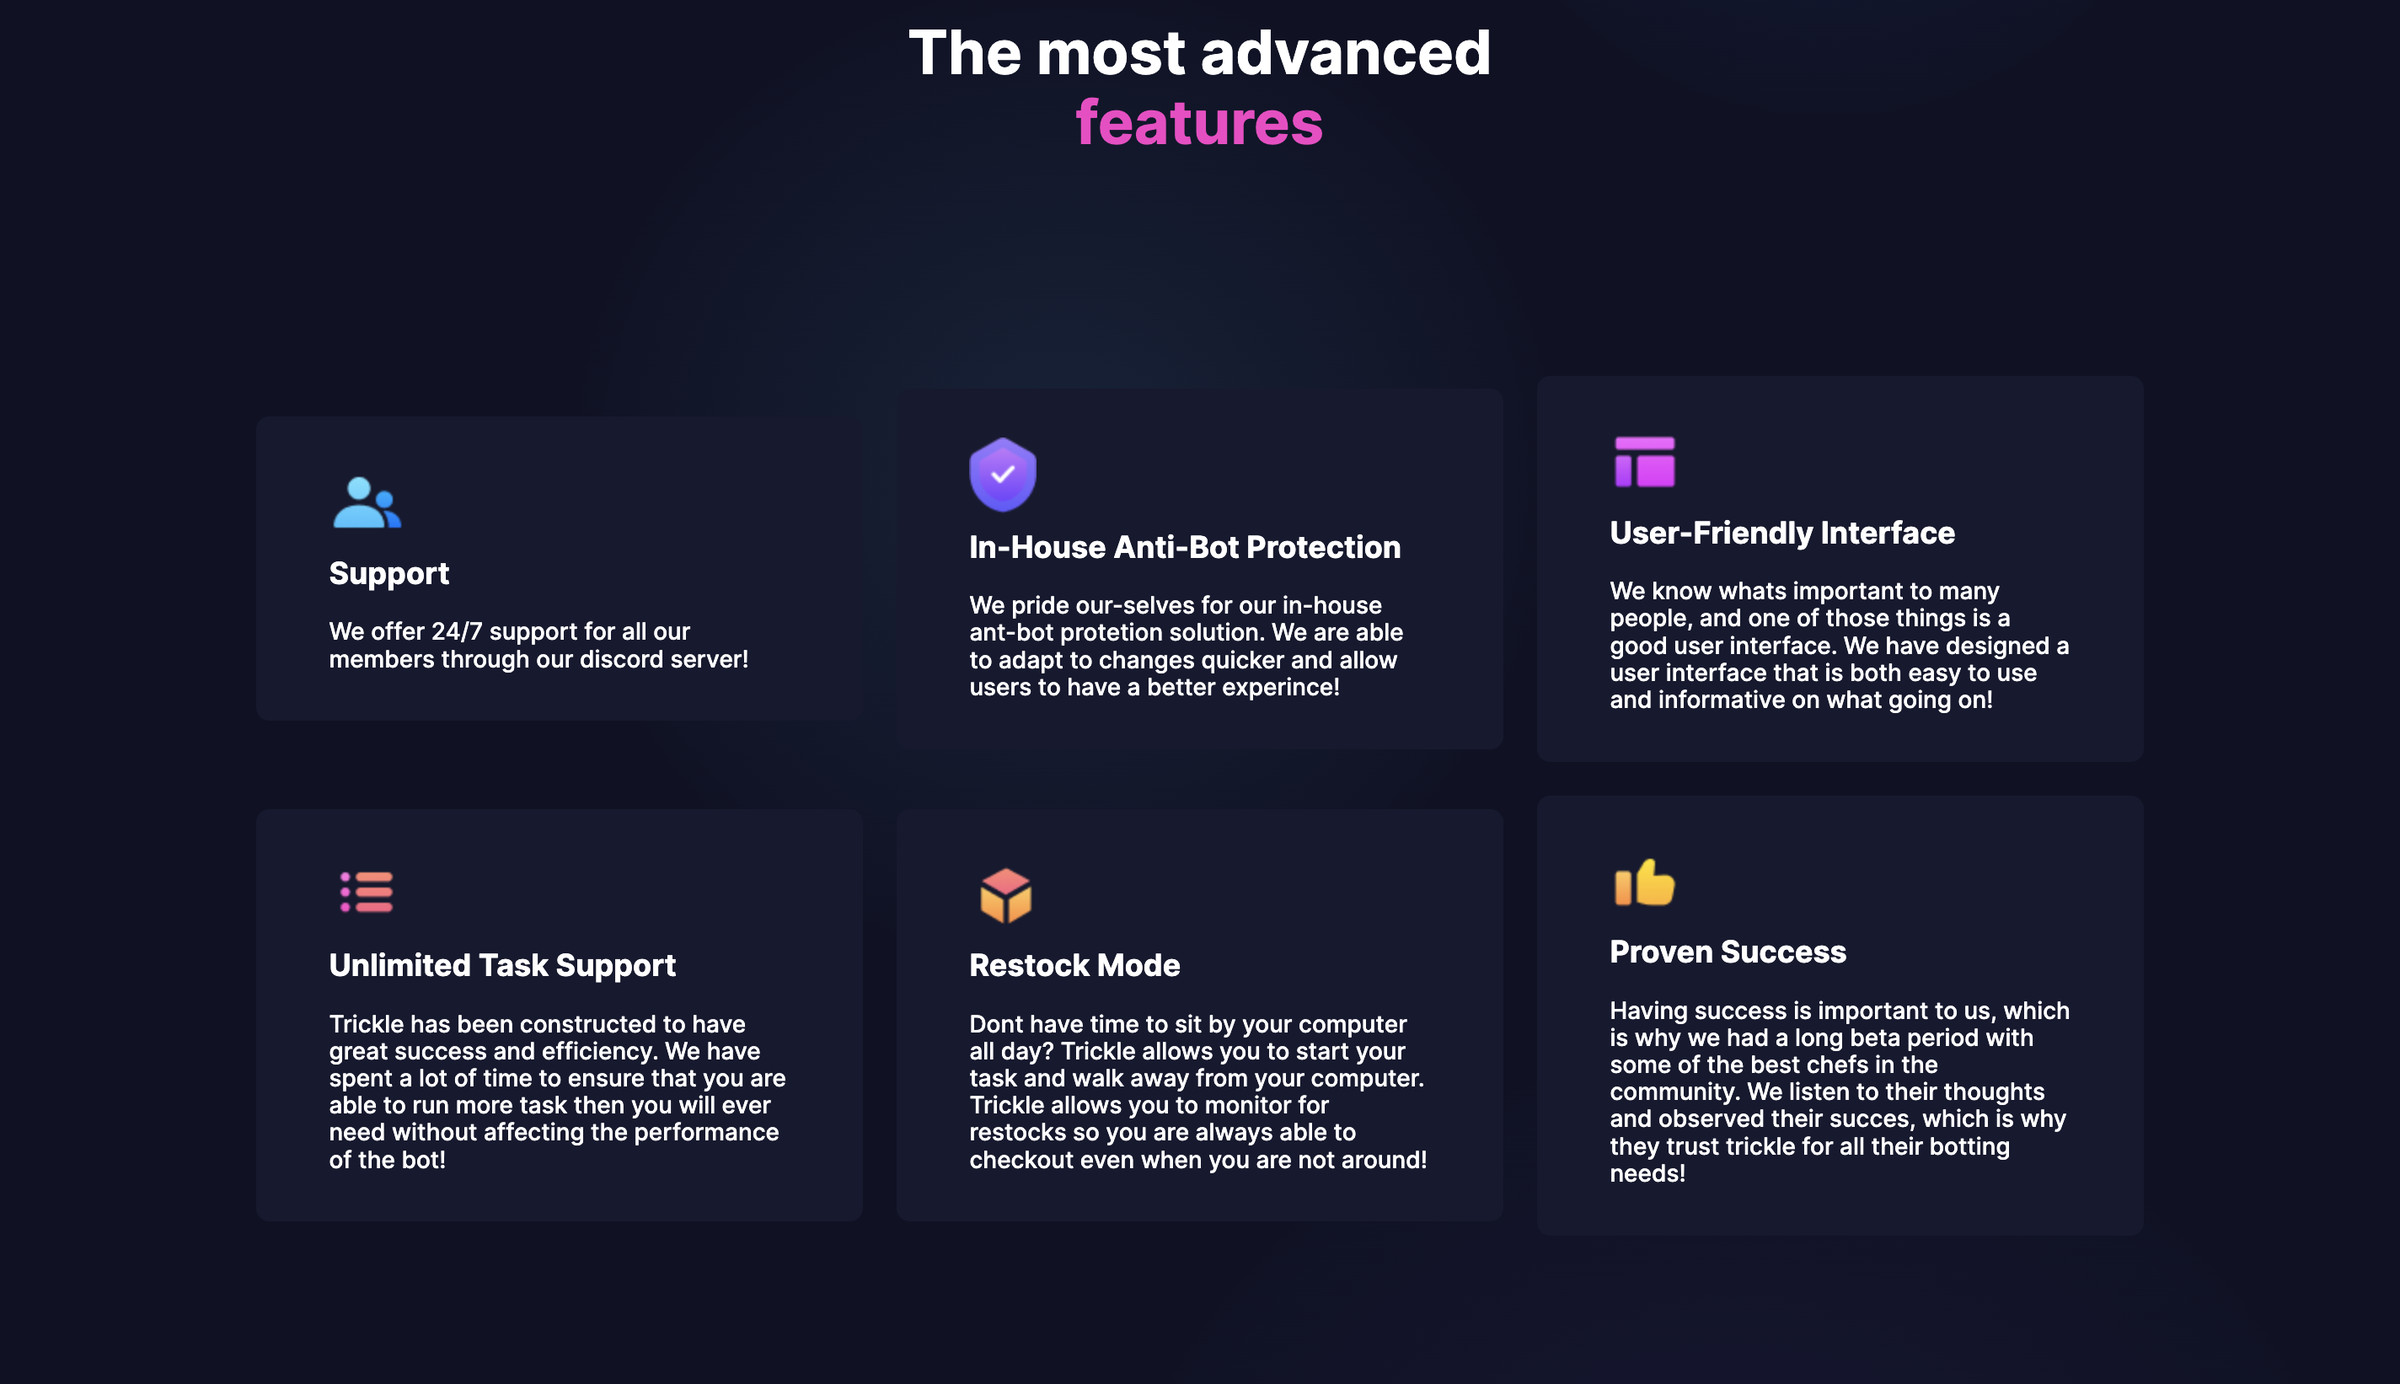 A website reading “the most advanced features” with six boxes below it describing those features, including 24/7 support, anti-bot protection, a friendly UI, and proven success.